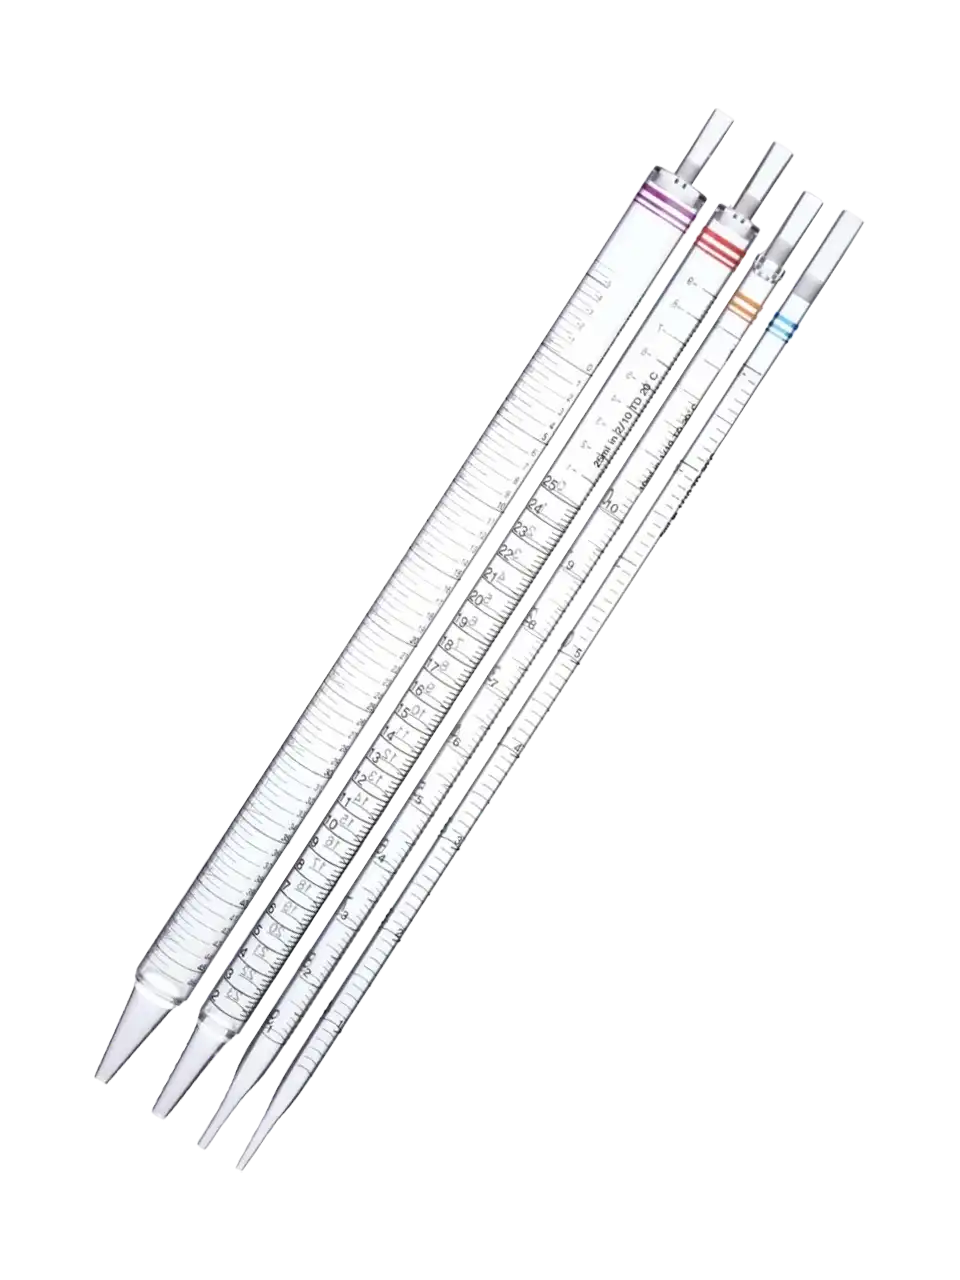 Serological Pipettes, P.S, Graduated, Disposable, Single Pack, Sterile, Black Scale, Yellow Ring Mark, 1 ml Volume, 500 pcs/box